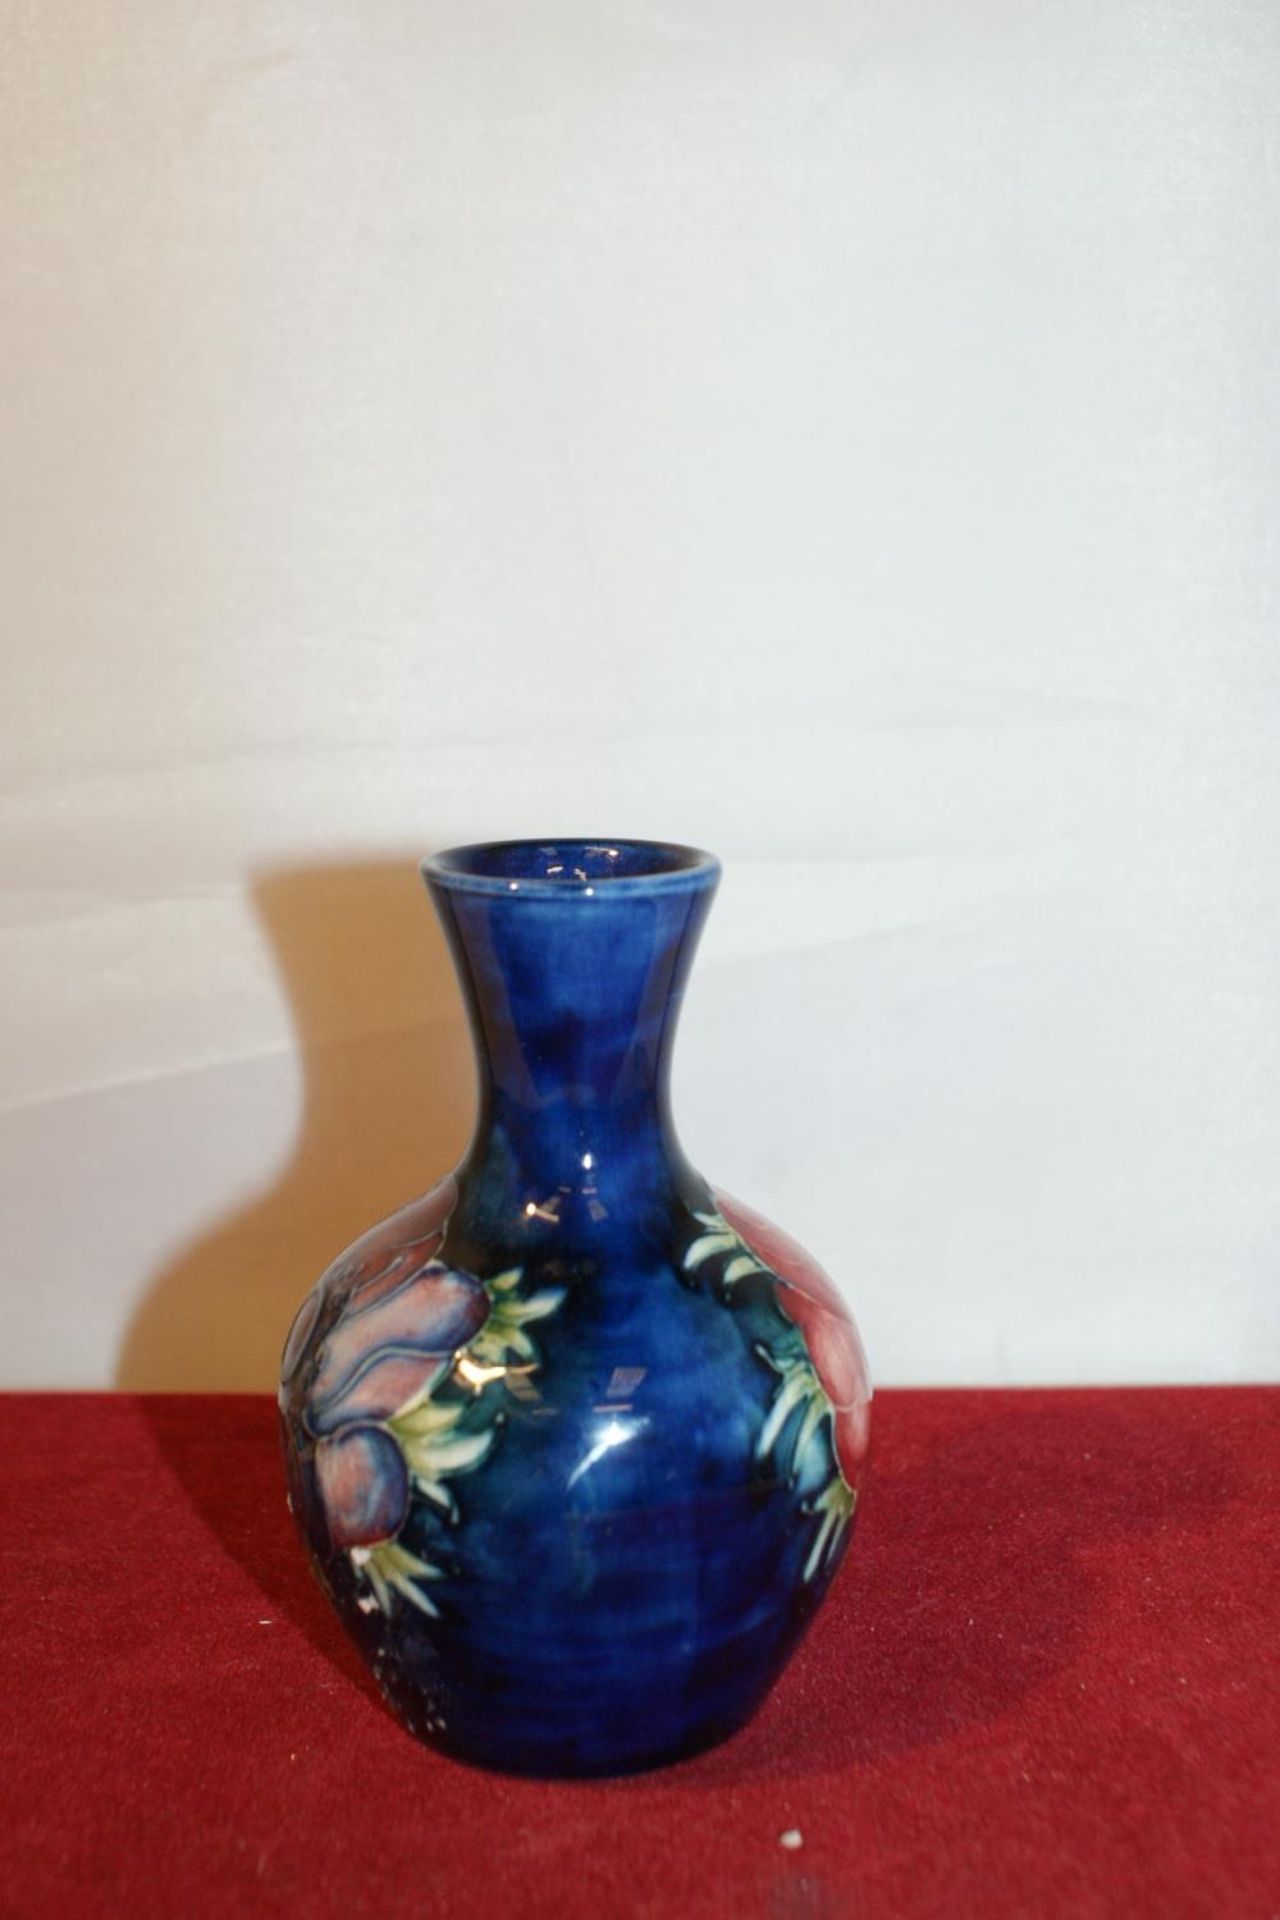 A MOORCROFT ANEMONE VASE 3.5 INCHES HIGH - Image 2 of 4